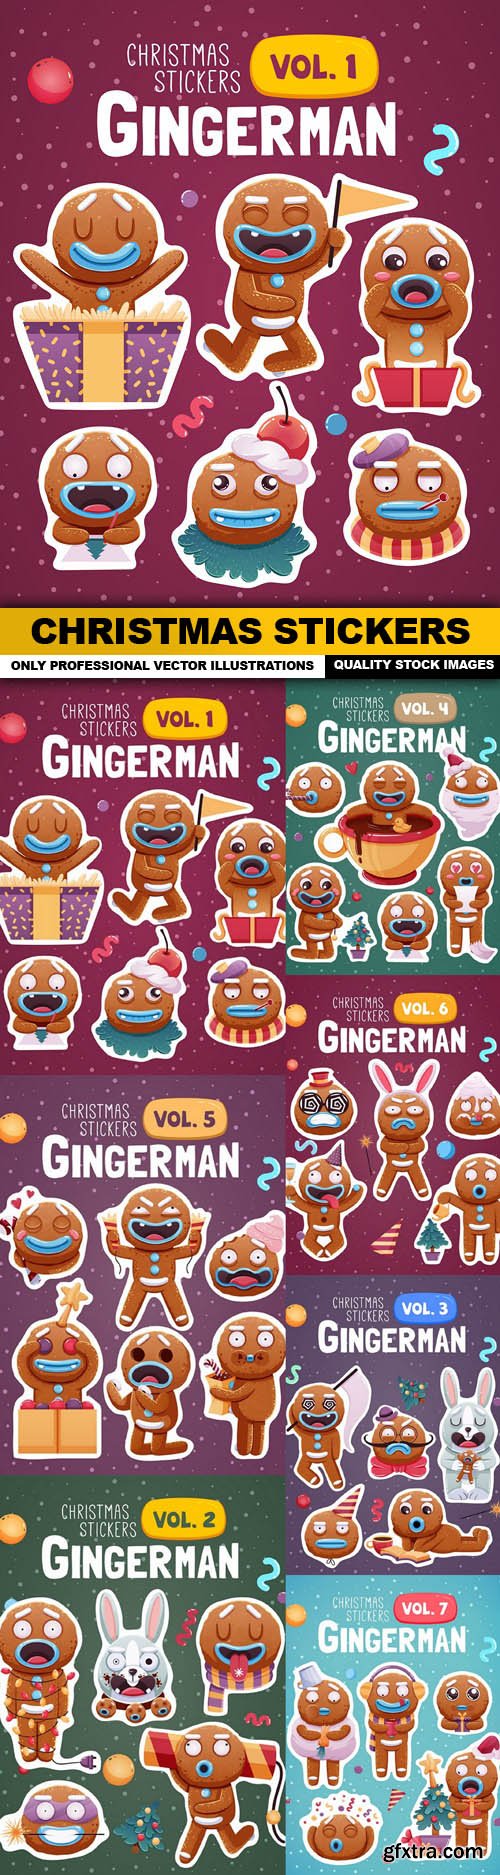 Christmas Stickers - 7 Vector